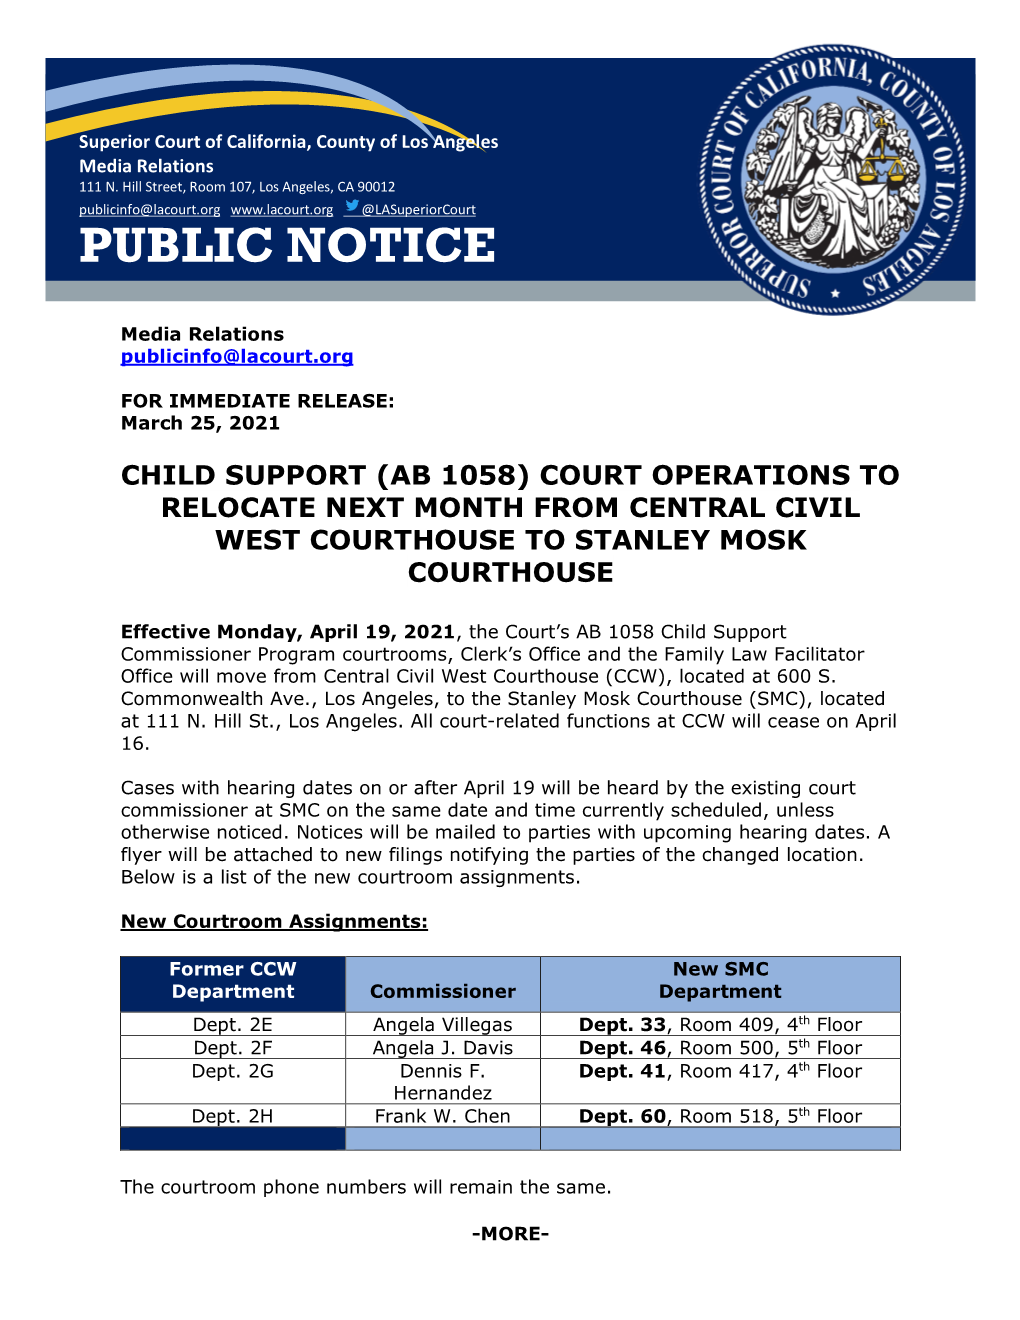 Child Support (Ab 1058) Court Operations to Relocate Next Month from Central Civil West Courthouse to Stanley Mosk Courthouse